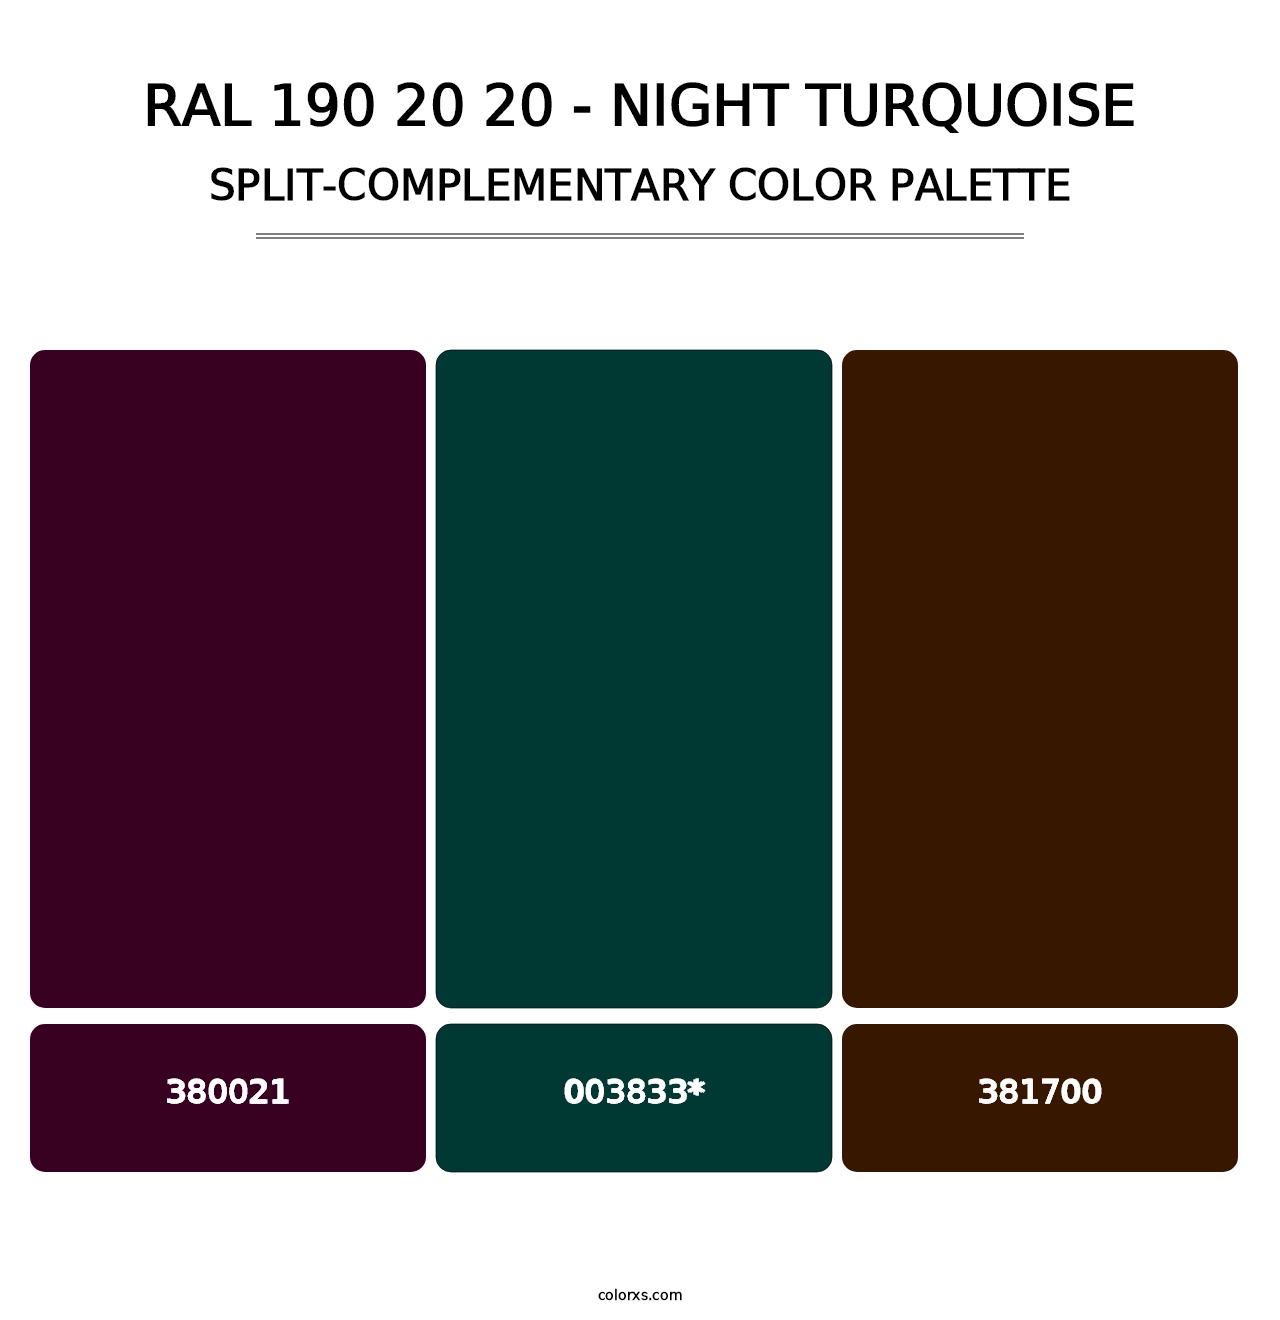 RAL 190 20 20 - Night Turquoise - Split-Complementary Color Palette